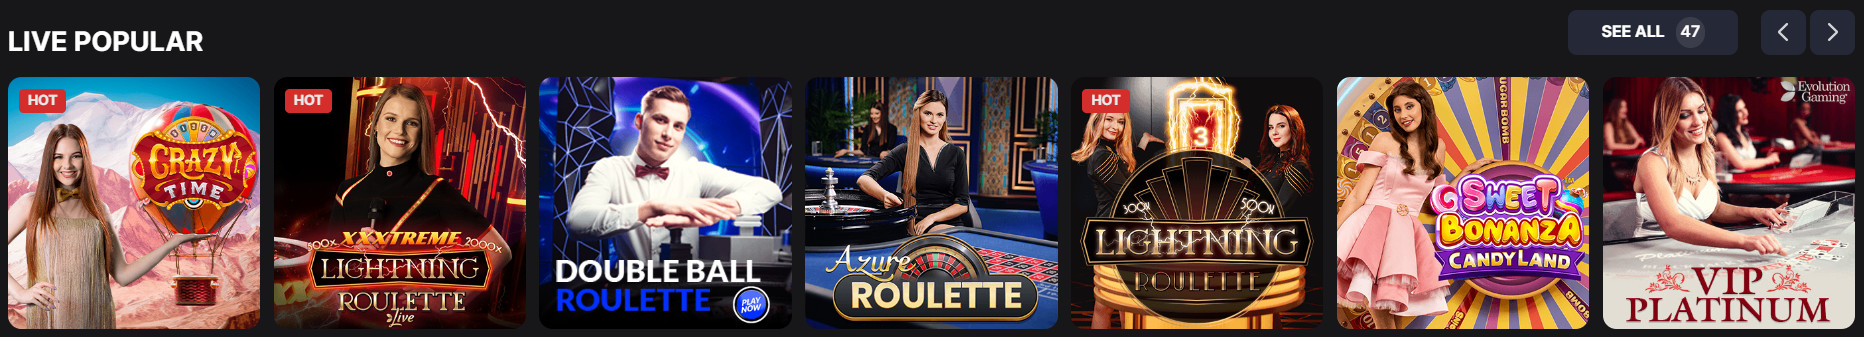 Live Games Section at Betsofa Casino